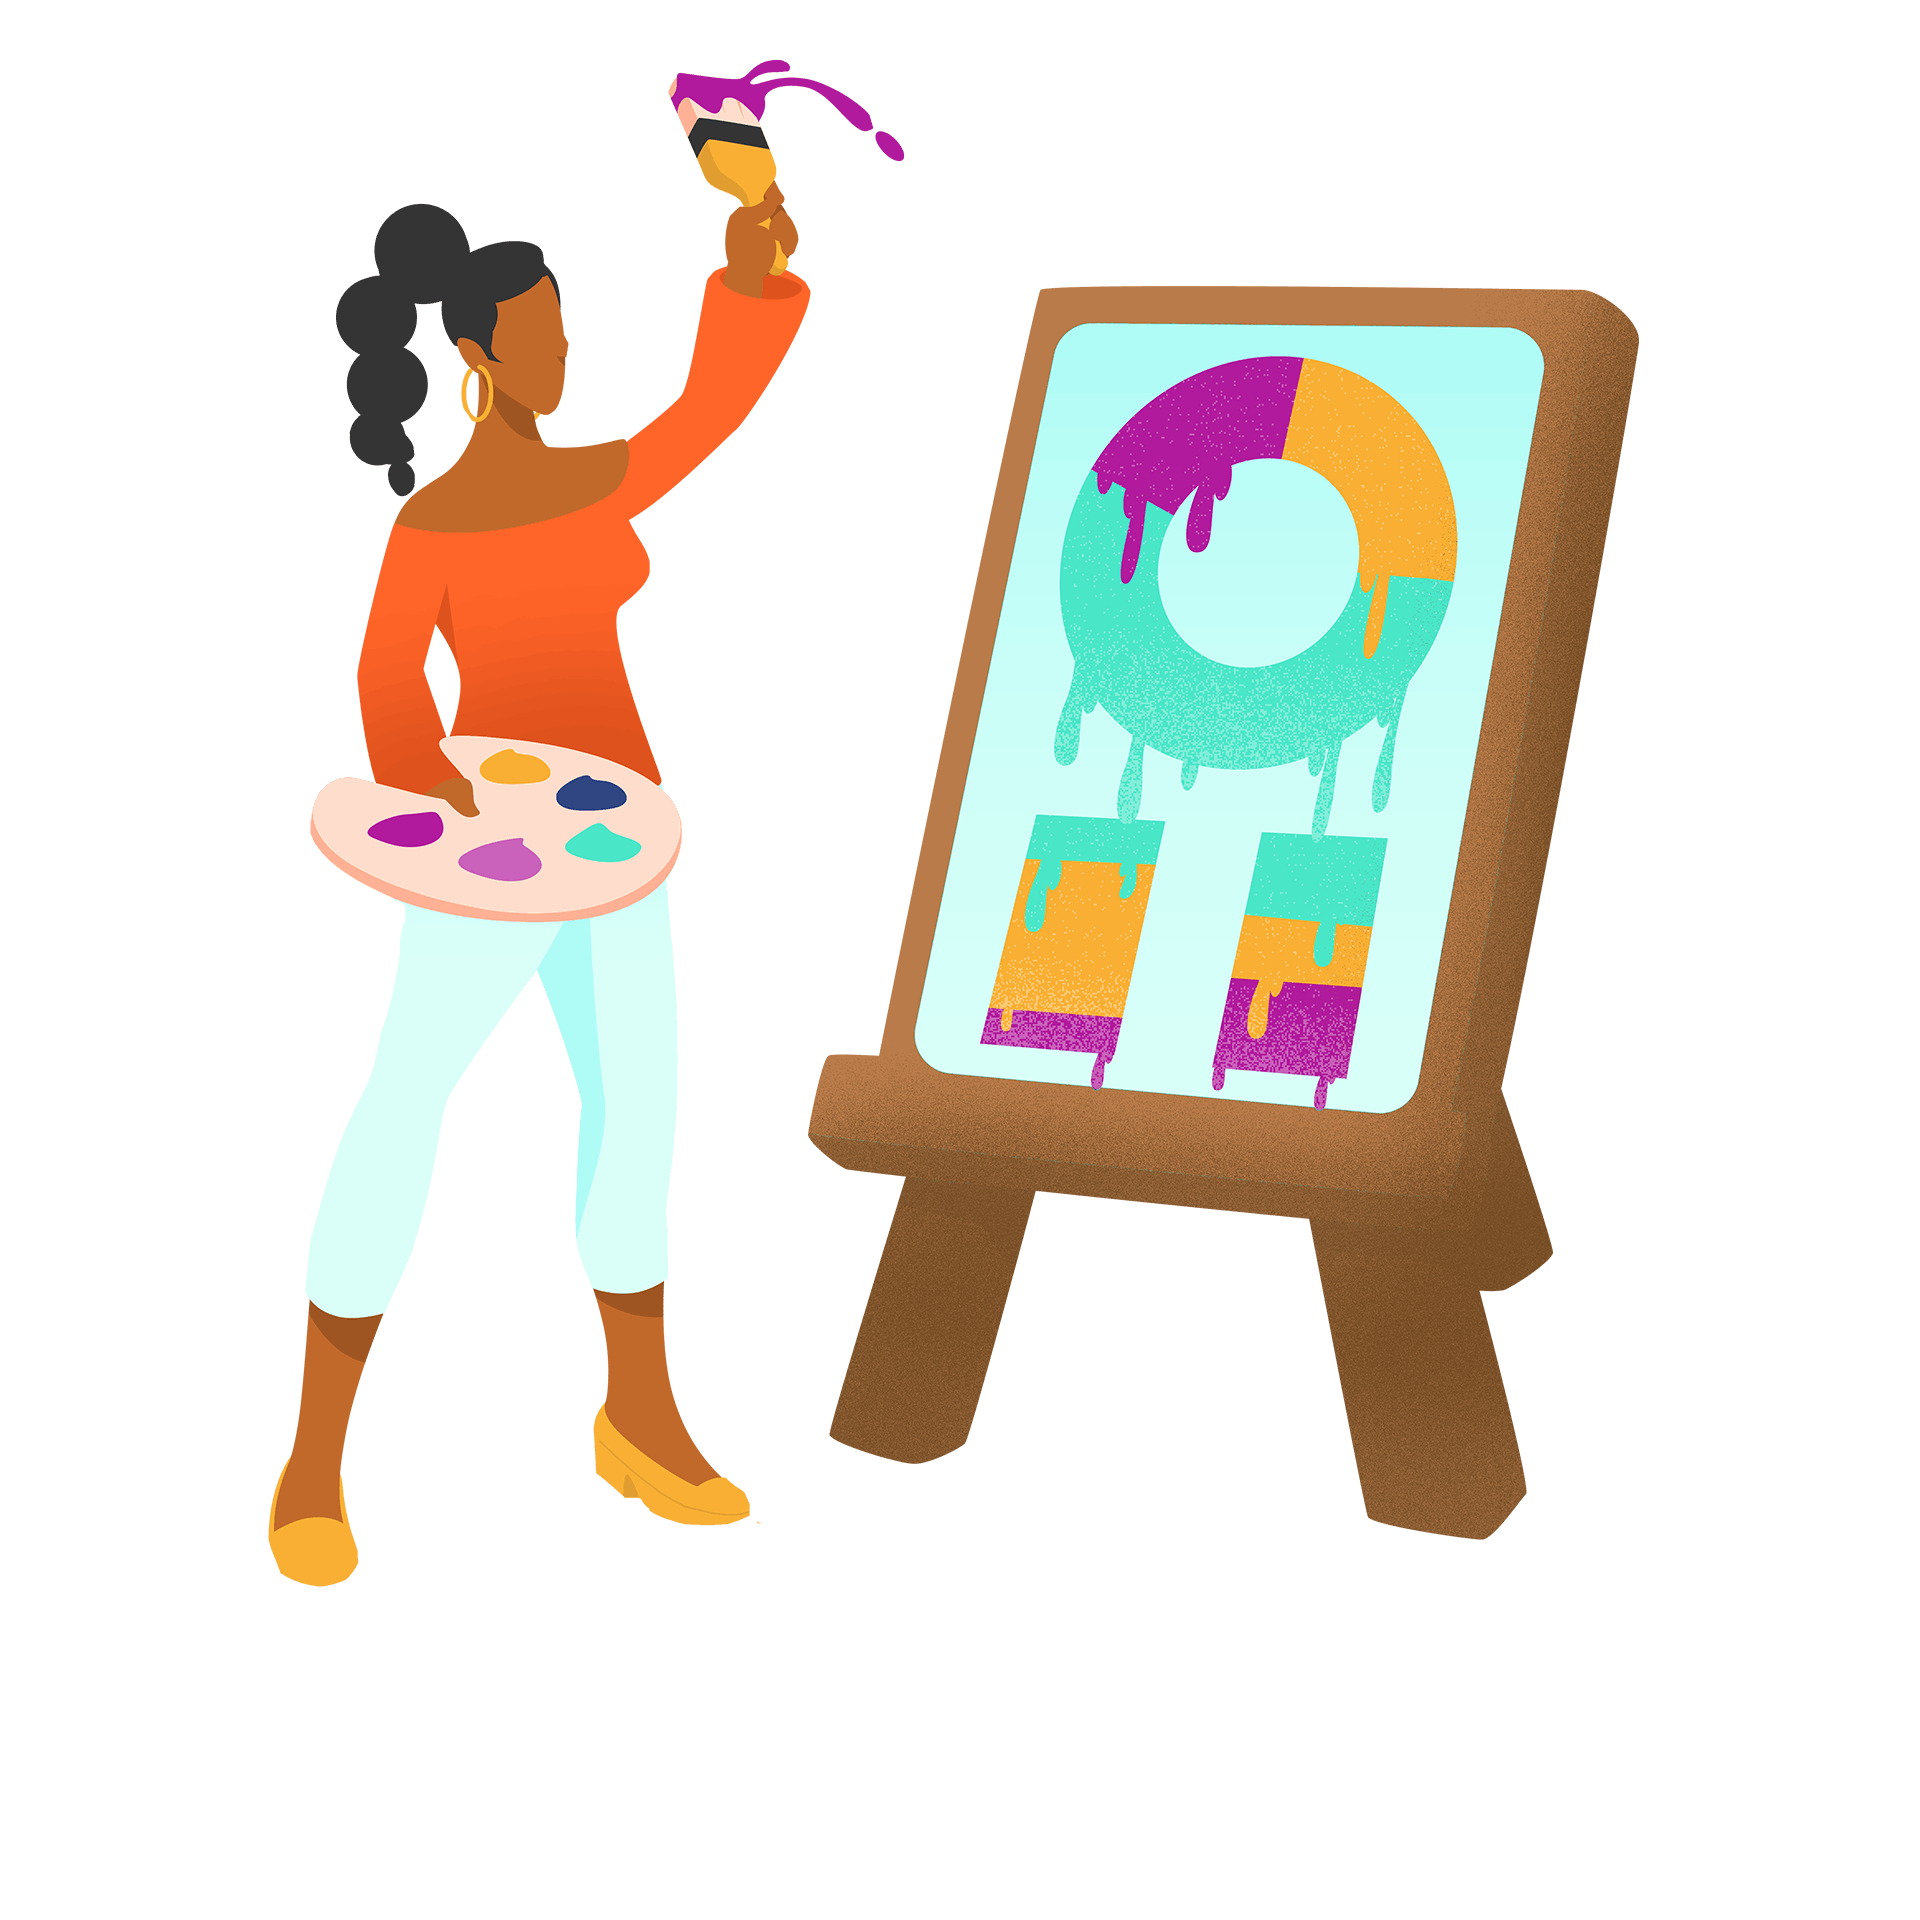 An illustration of a person painting the chart